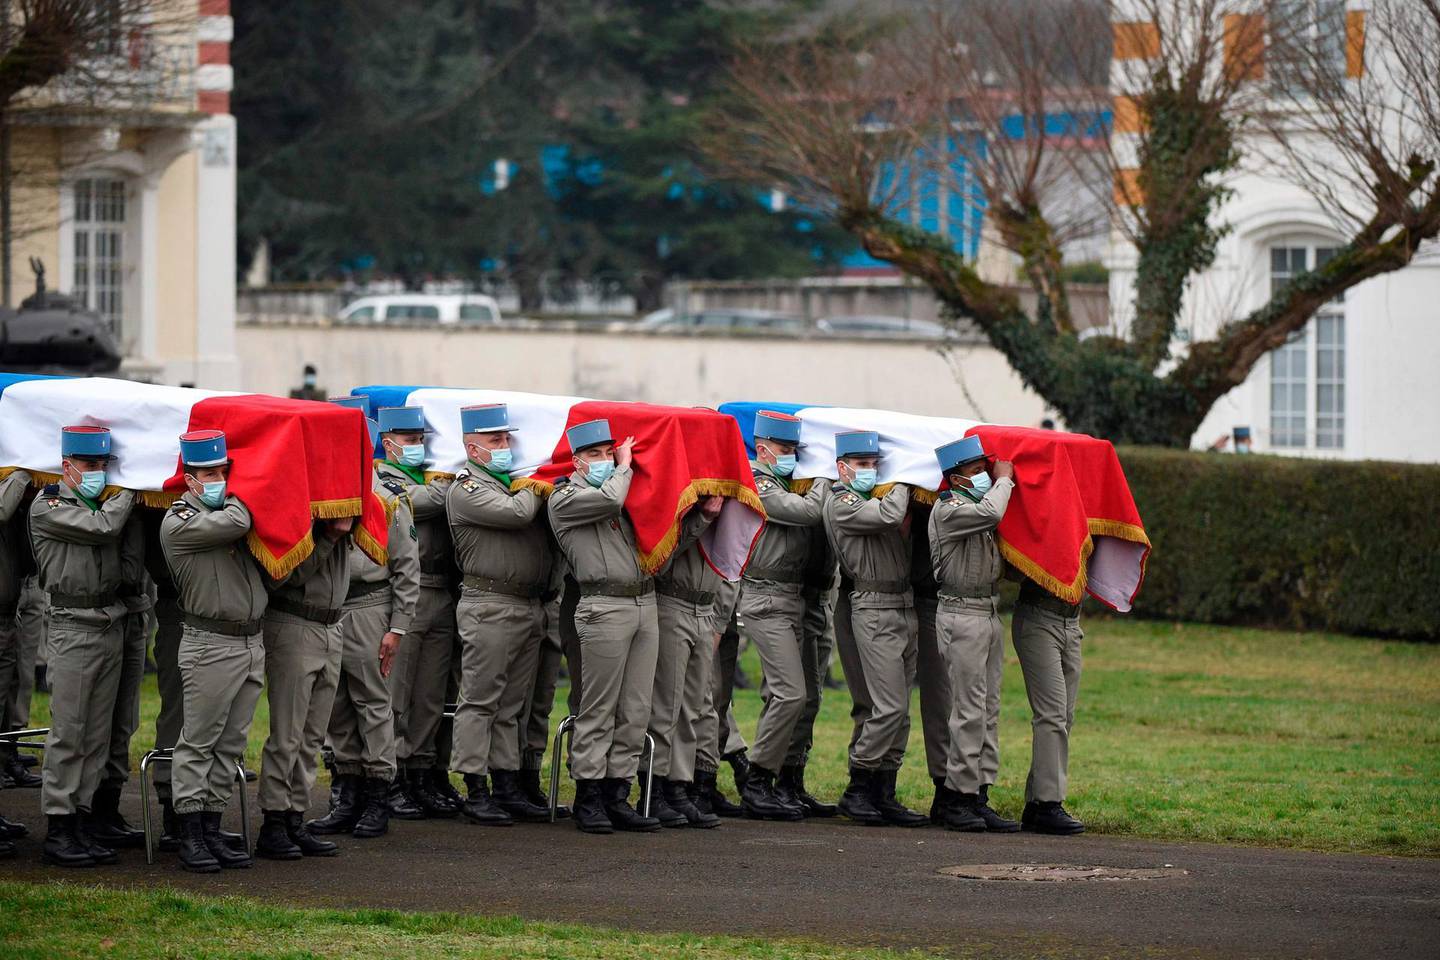 Servicemen of the '1er Regiment de Chasseurs' (1st Hunter Regiment) carry the coffins of three French soldiers who were killed in Mali serving in the country's 'Barkhane force' during a tribute ceremony at Thierville-sur-Meuse, eastern France on January 5, 2021.  Three French soldiers were killed on December 28, 2020, in Mali when their armoured vehicle struck an explosive device in the Hombori region in the centre of the poor Sahel state, the French presidency said. / AFP / JEAN-CHRISTOPHE VERHAEGEN
